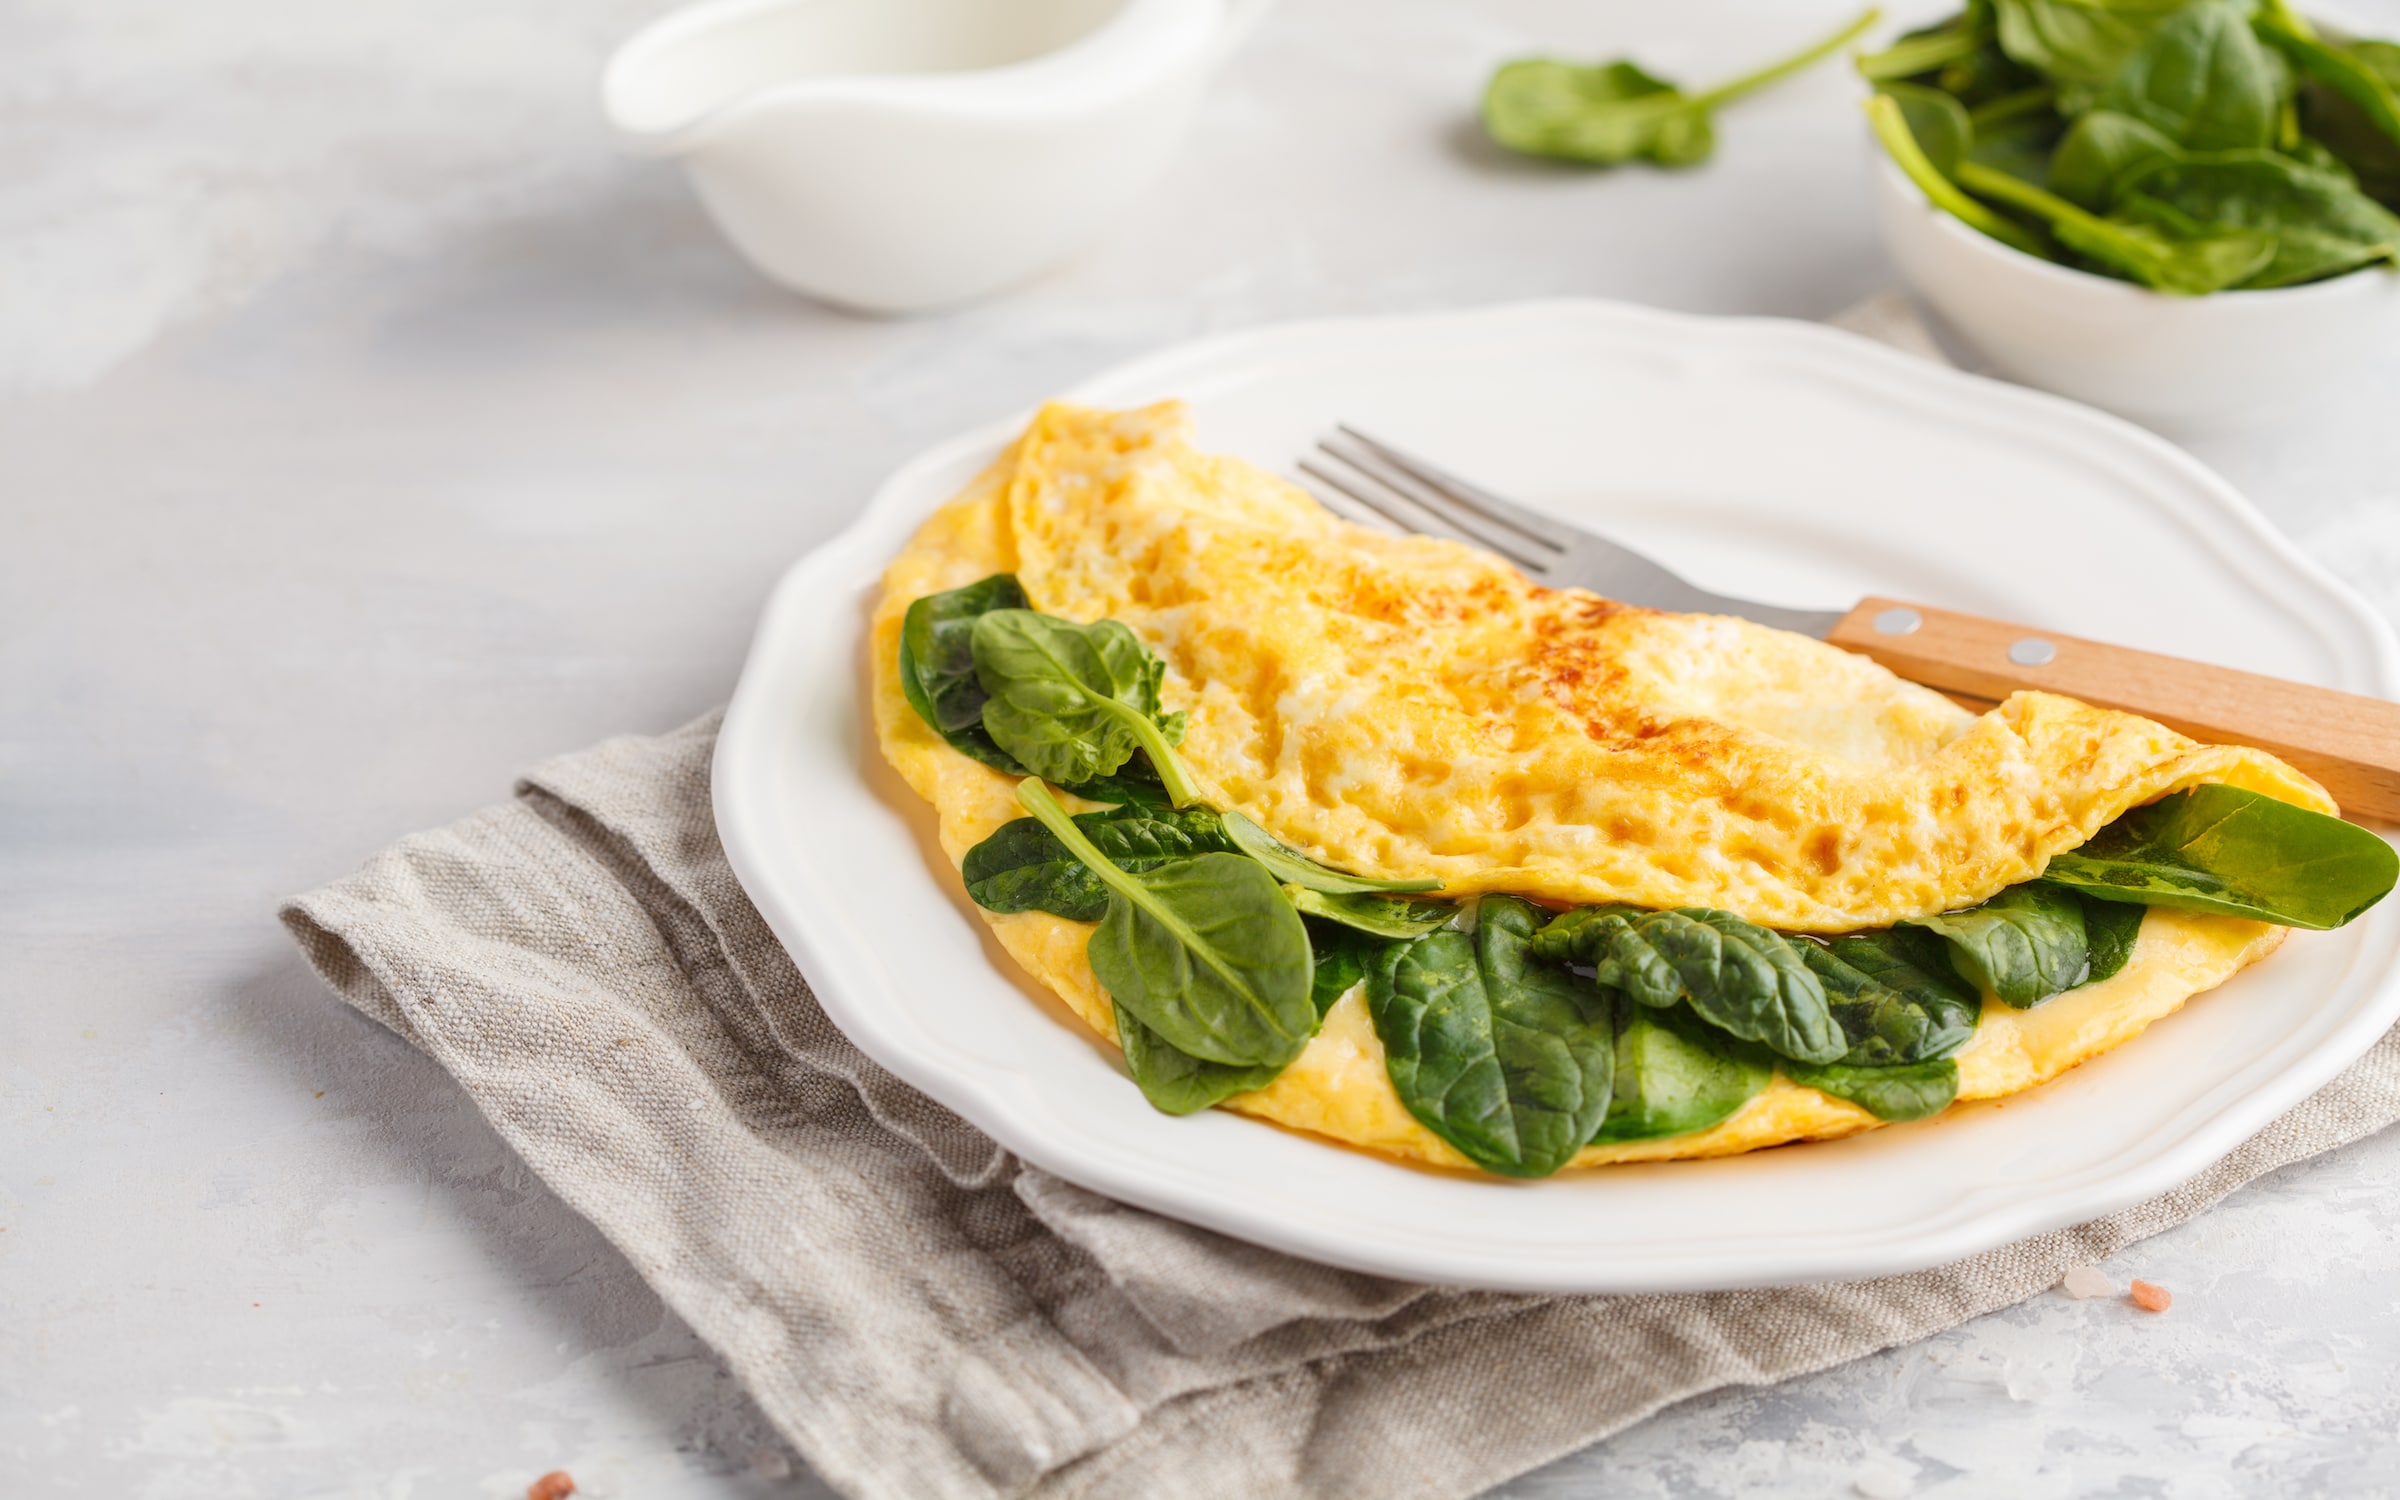 Omelette stuffed with spinach and cheese